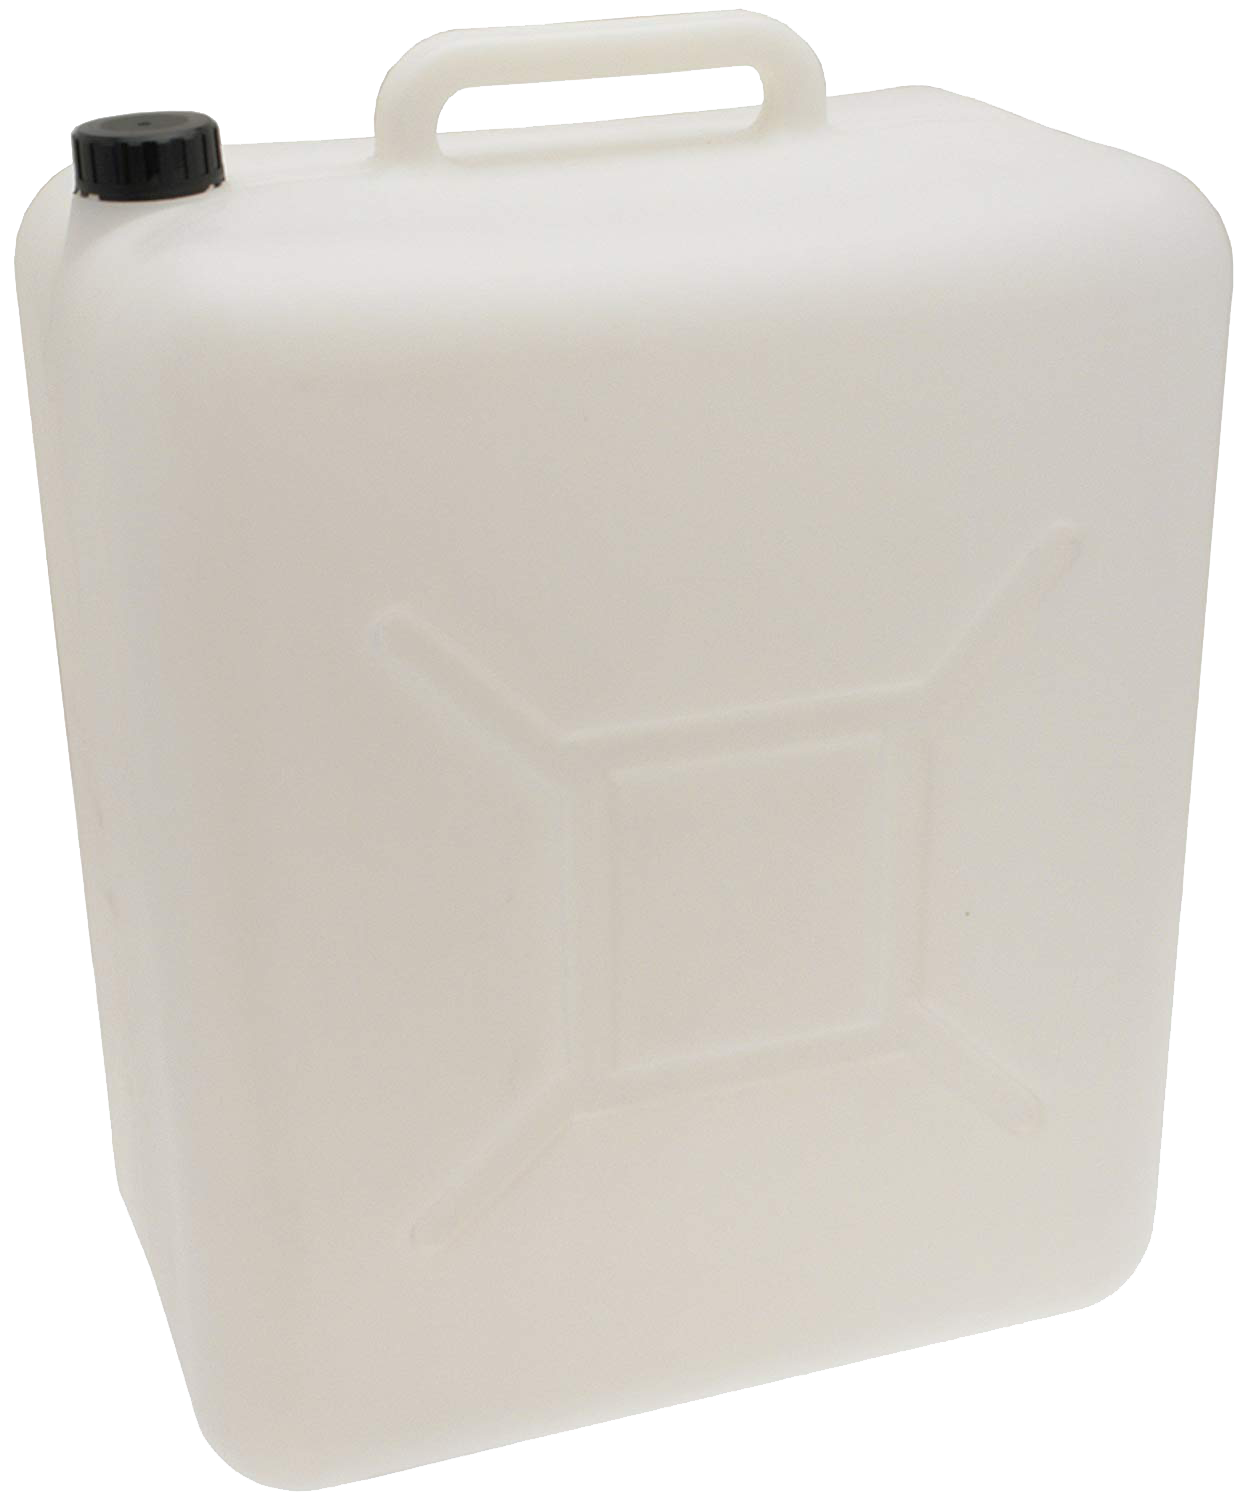 Jerrycan Free PNG